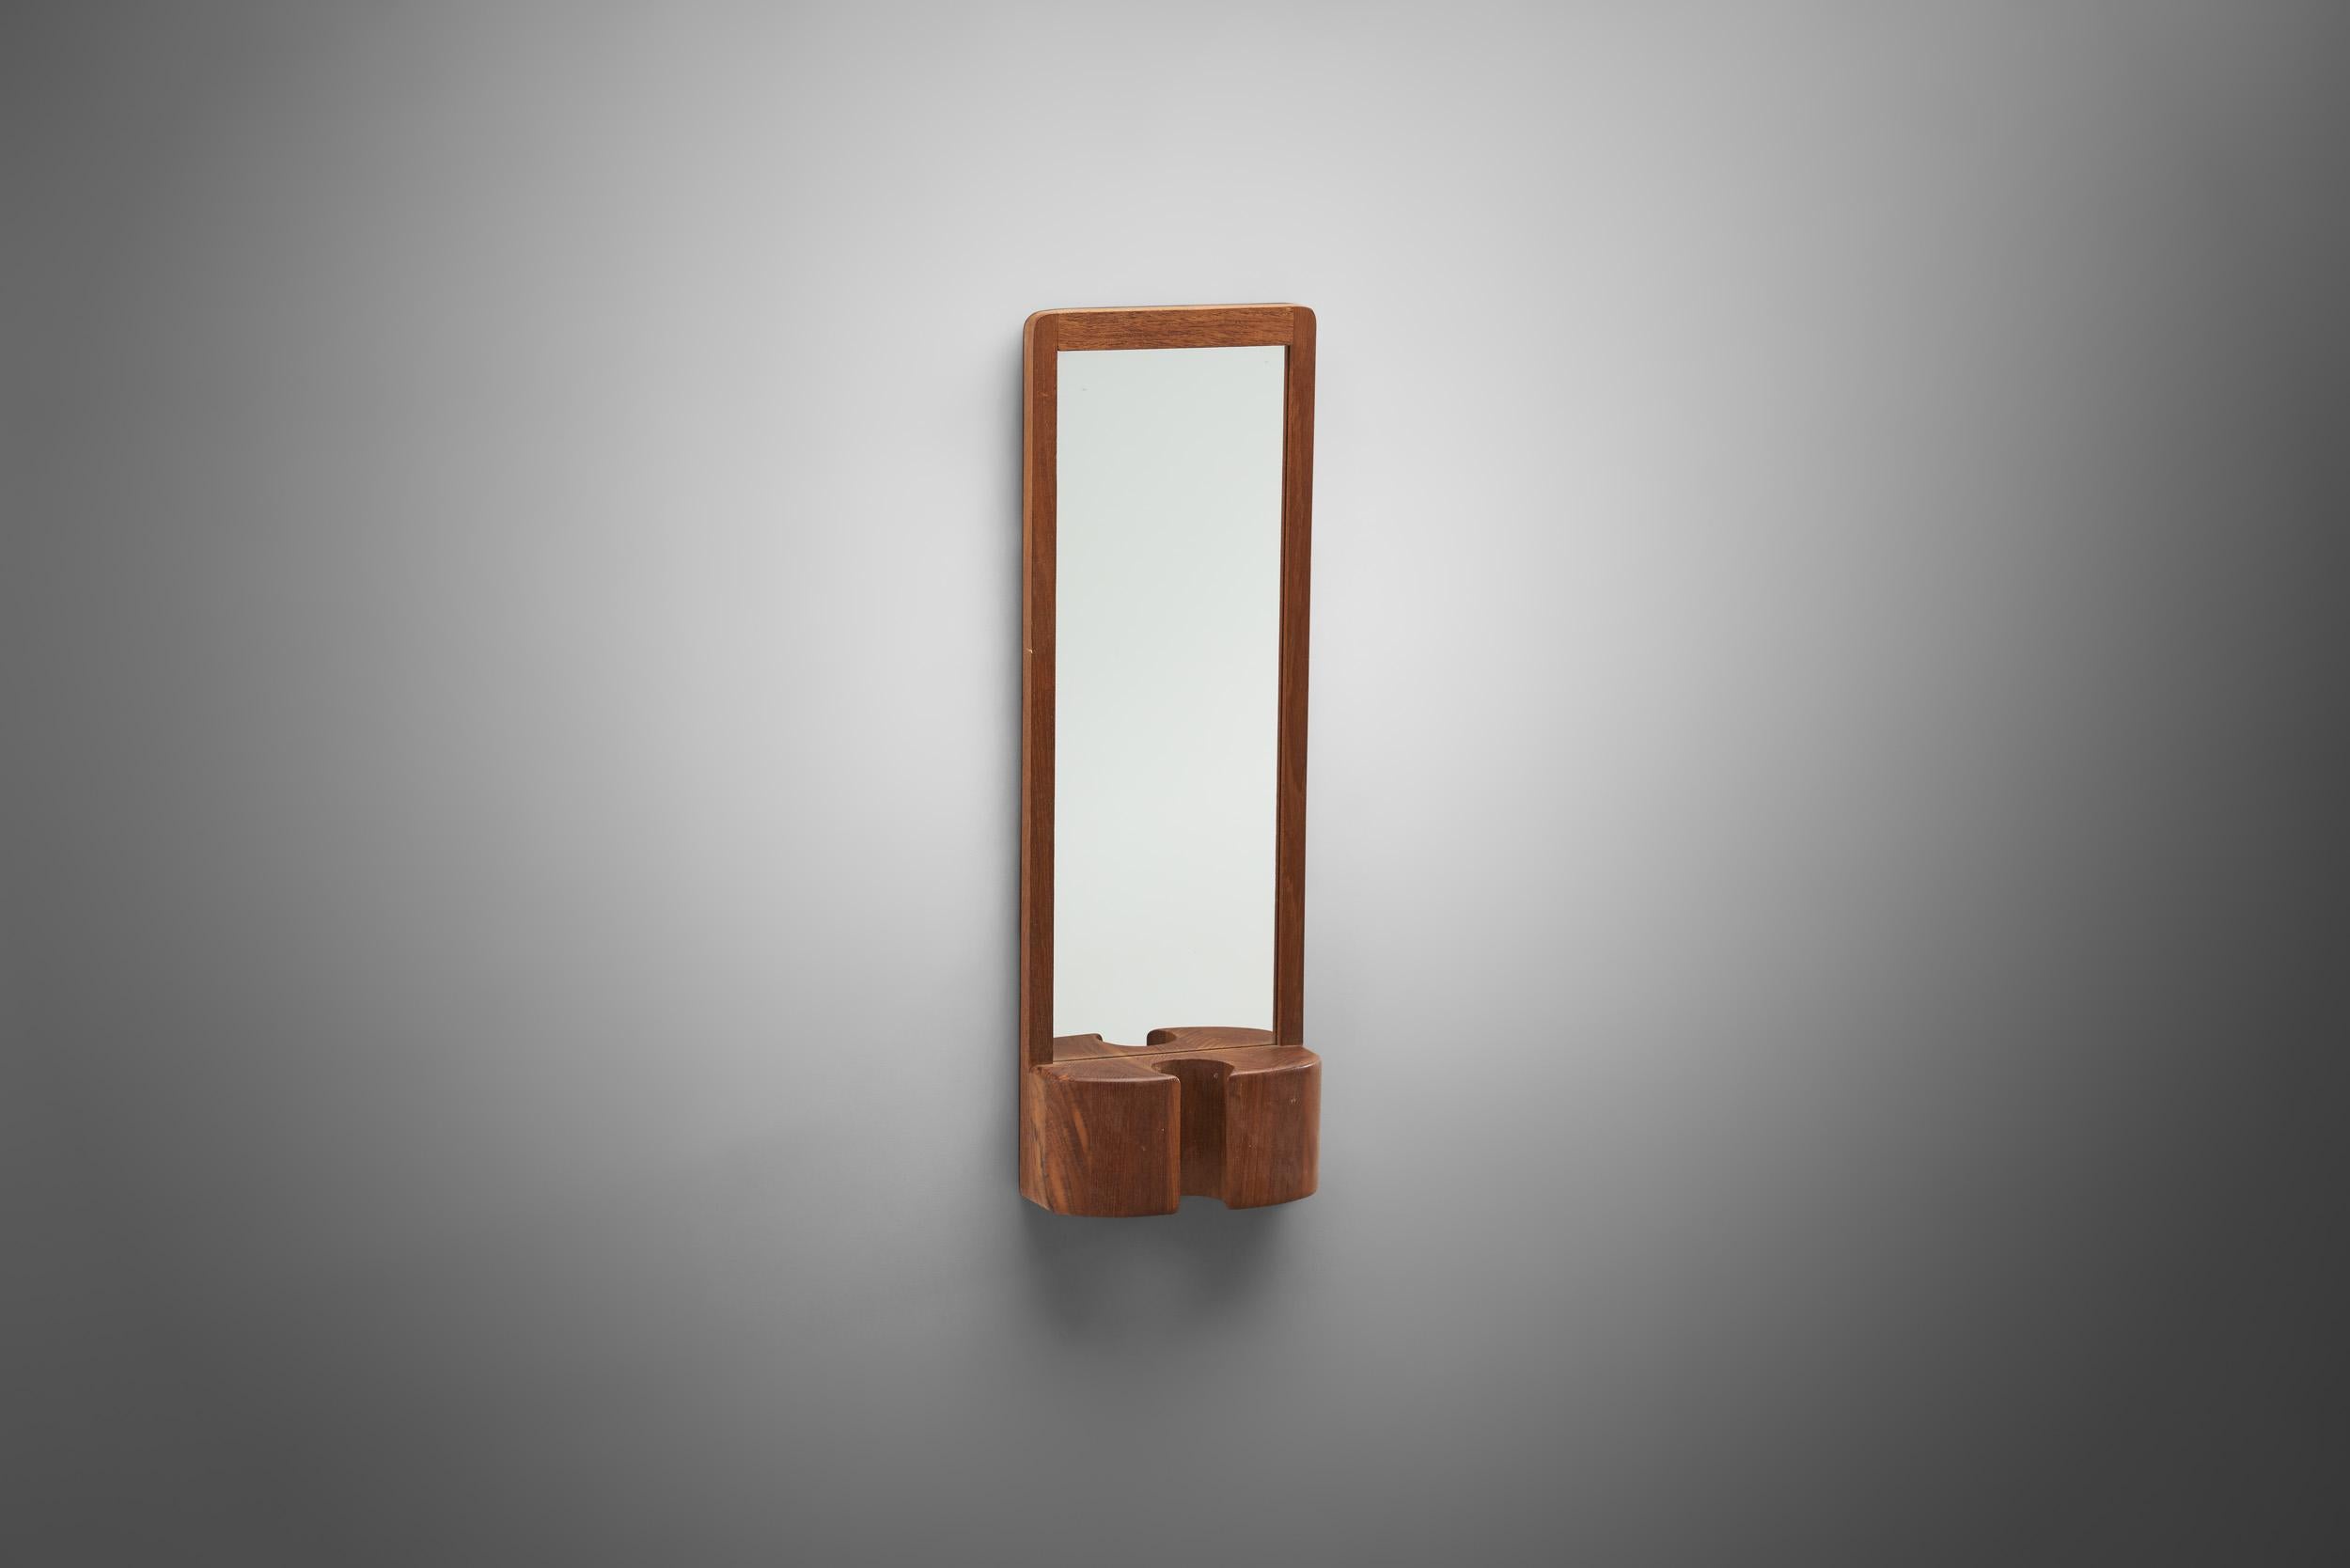 Mirrors are versatile pieces of interior décor with several functions and advantages; they create depth, increase light coverage, and add a statement to any space. Fusing function and form, wall mirrors offer useful reflection while also providing